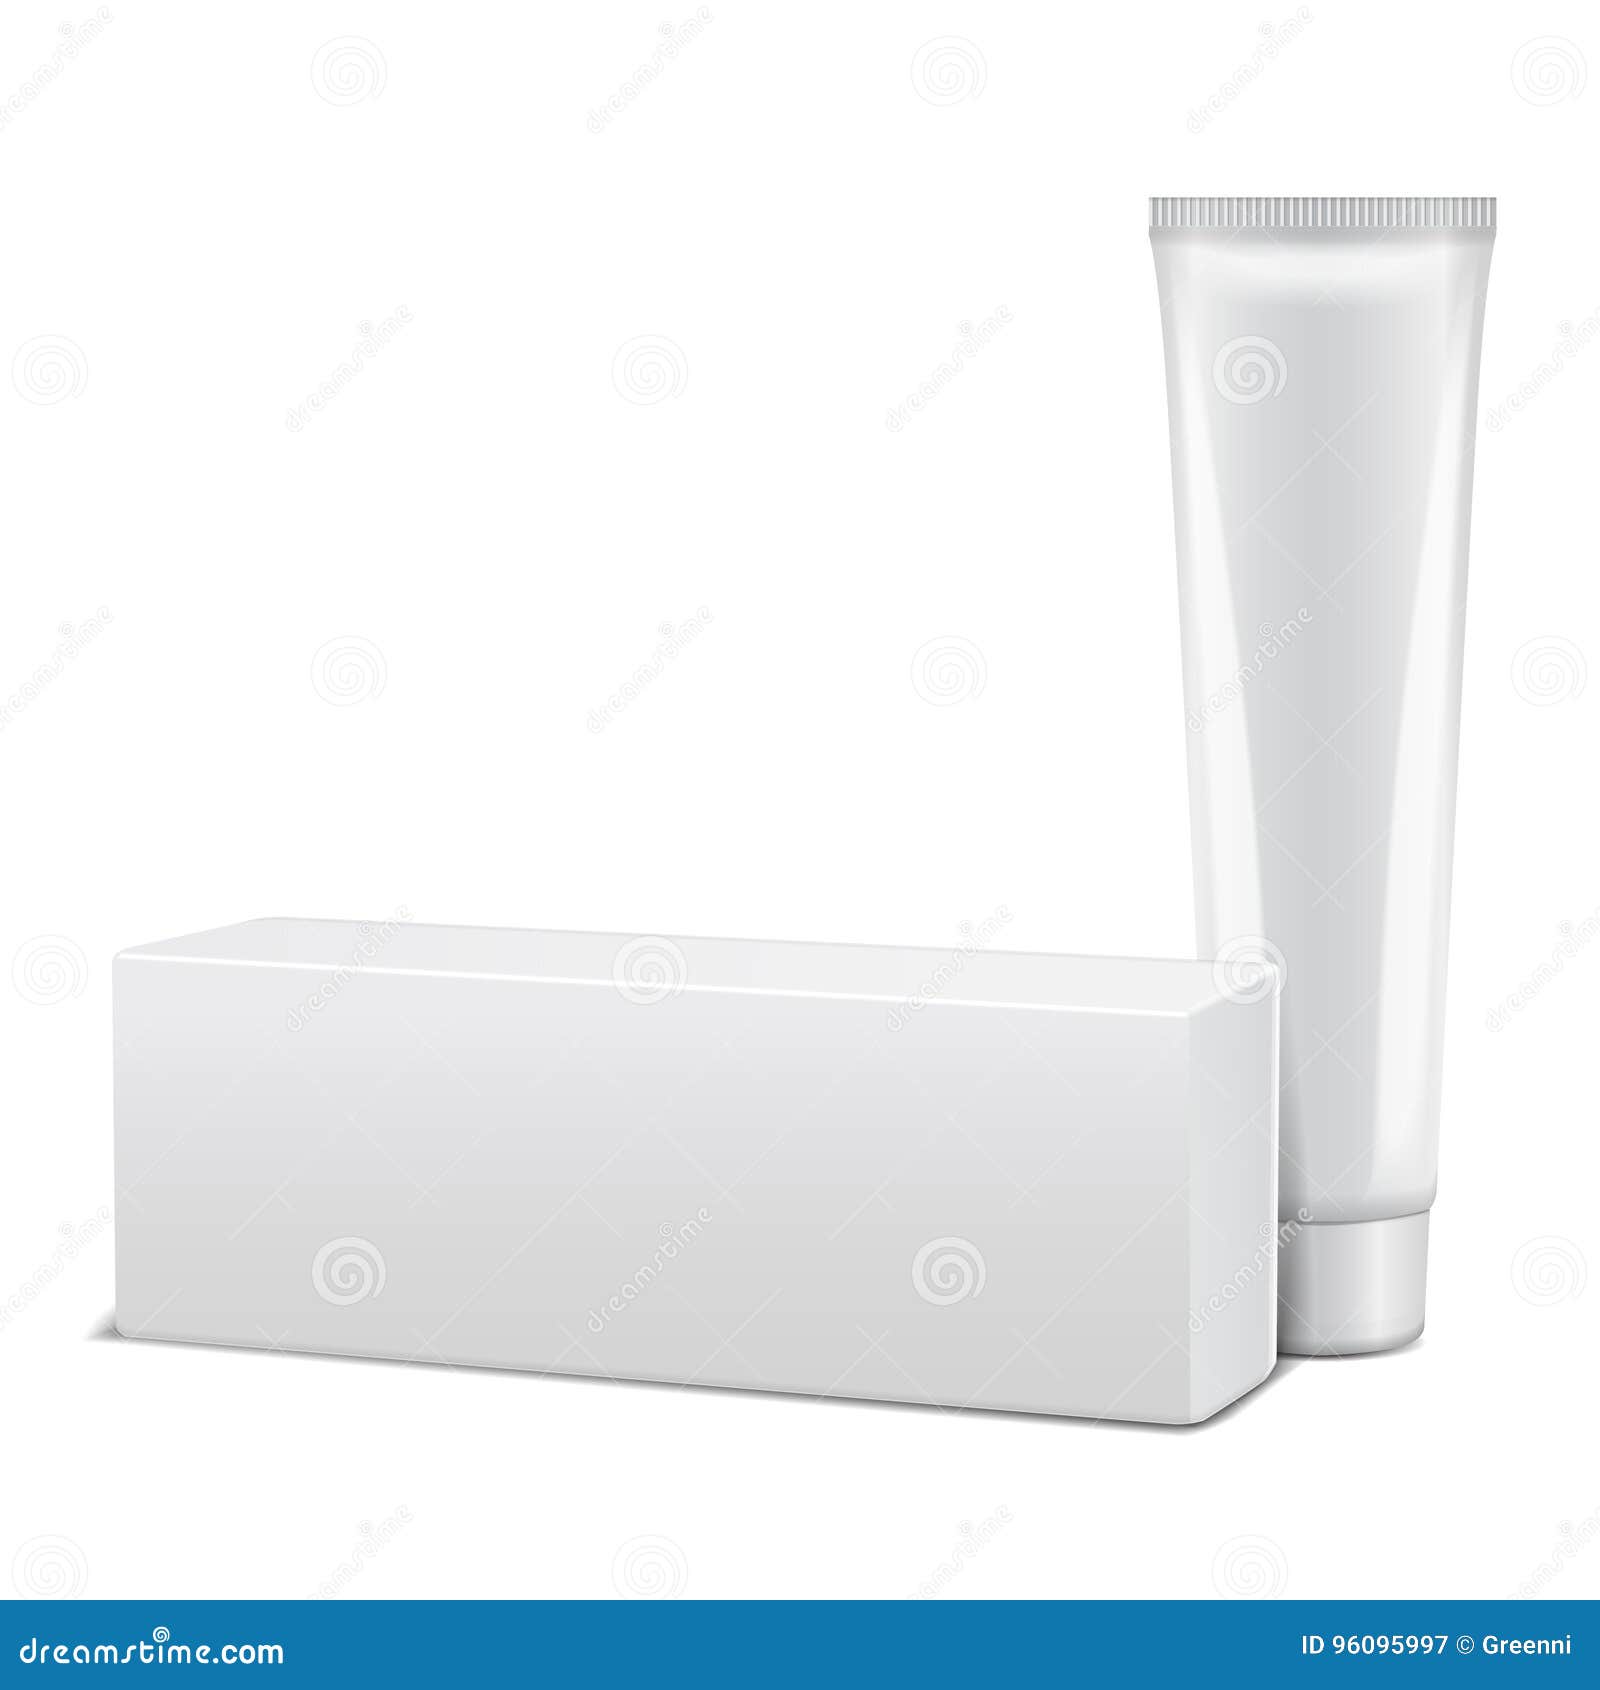 Download Blank Plastic Tube With White Box For Medicine Or Cosmetics Cream Gel Skin Care Toothpaste Packaging Mockup Stock Vector Illustration Of Medicine Glossy 96095997